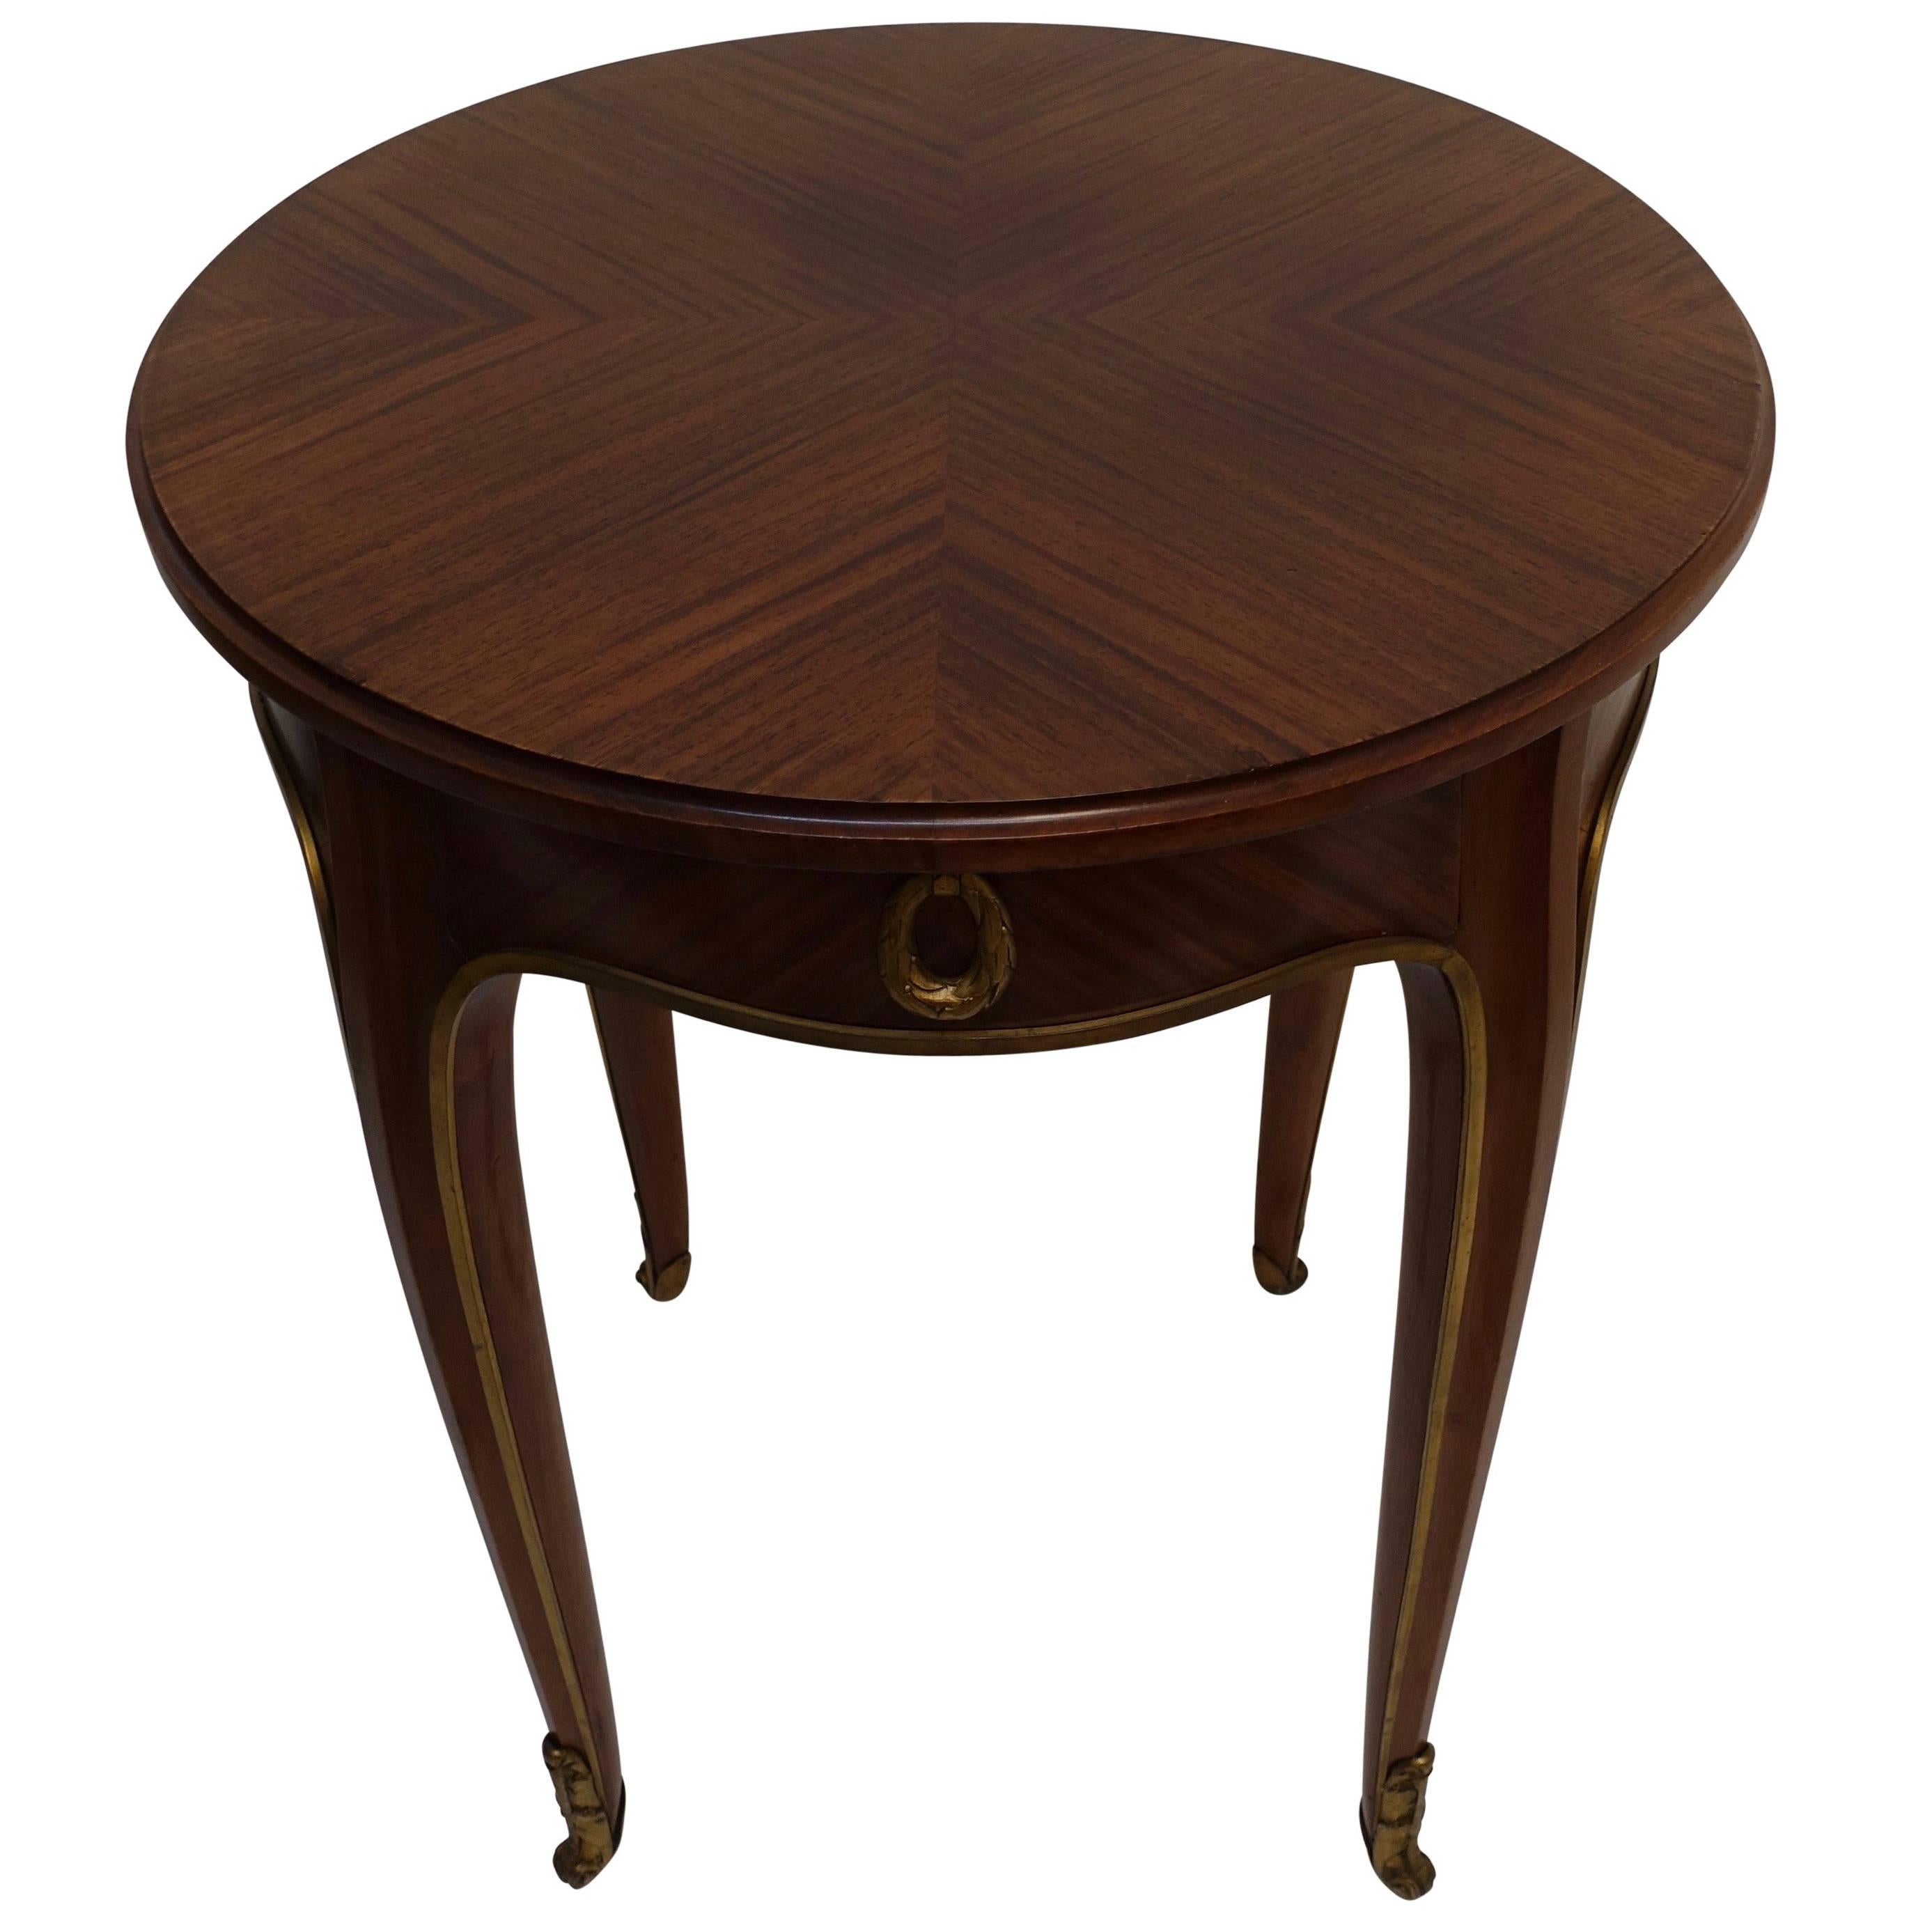 Louis XVI Style Mahogany Side Table with Drawer, French Early 20th century